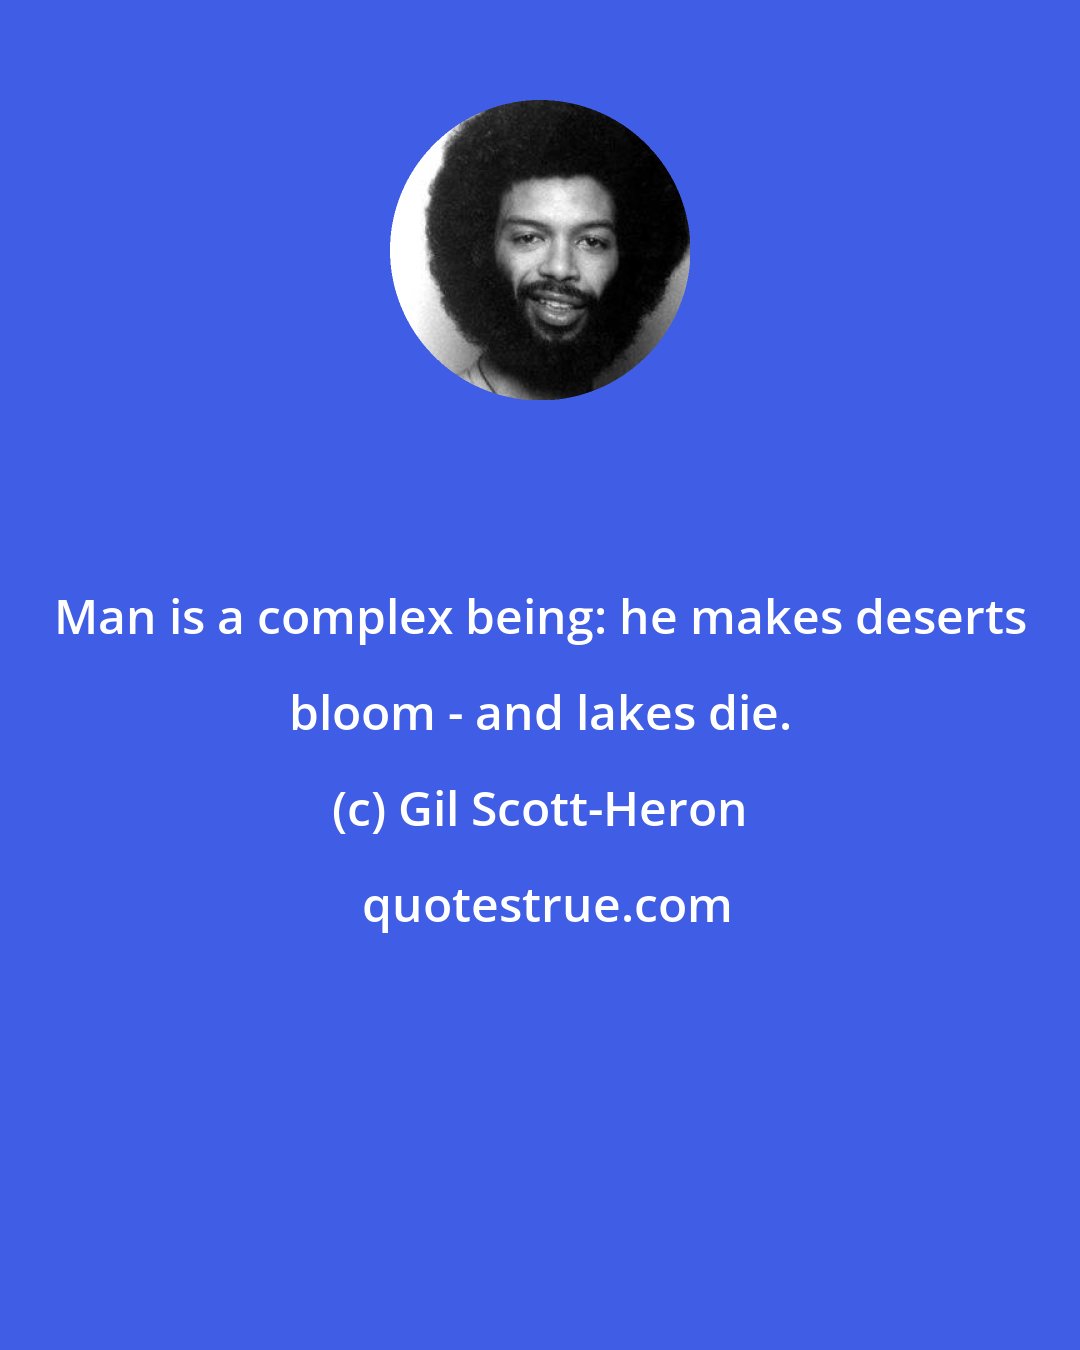 Gil Scott-Heron: Man is a complex being: he makes deserts bloom - and lakes die.